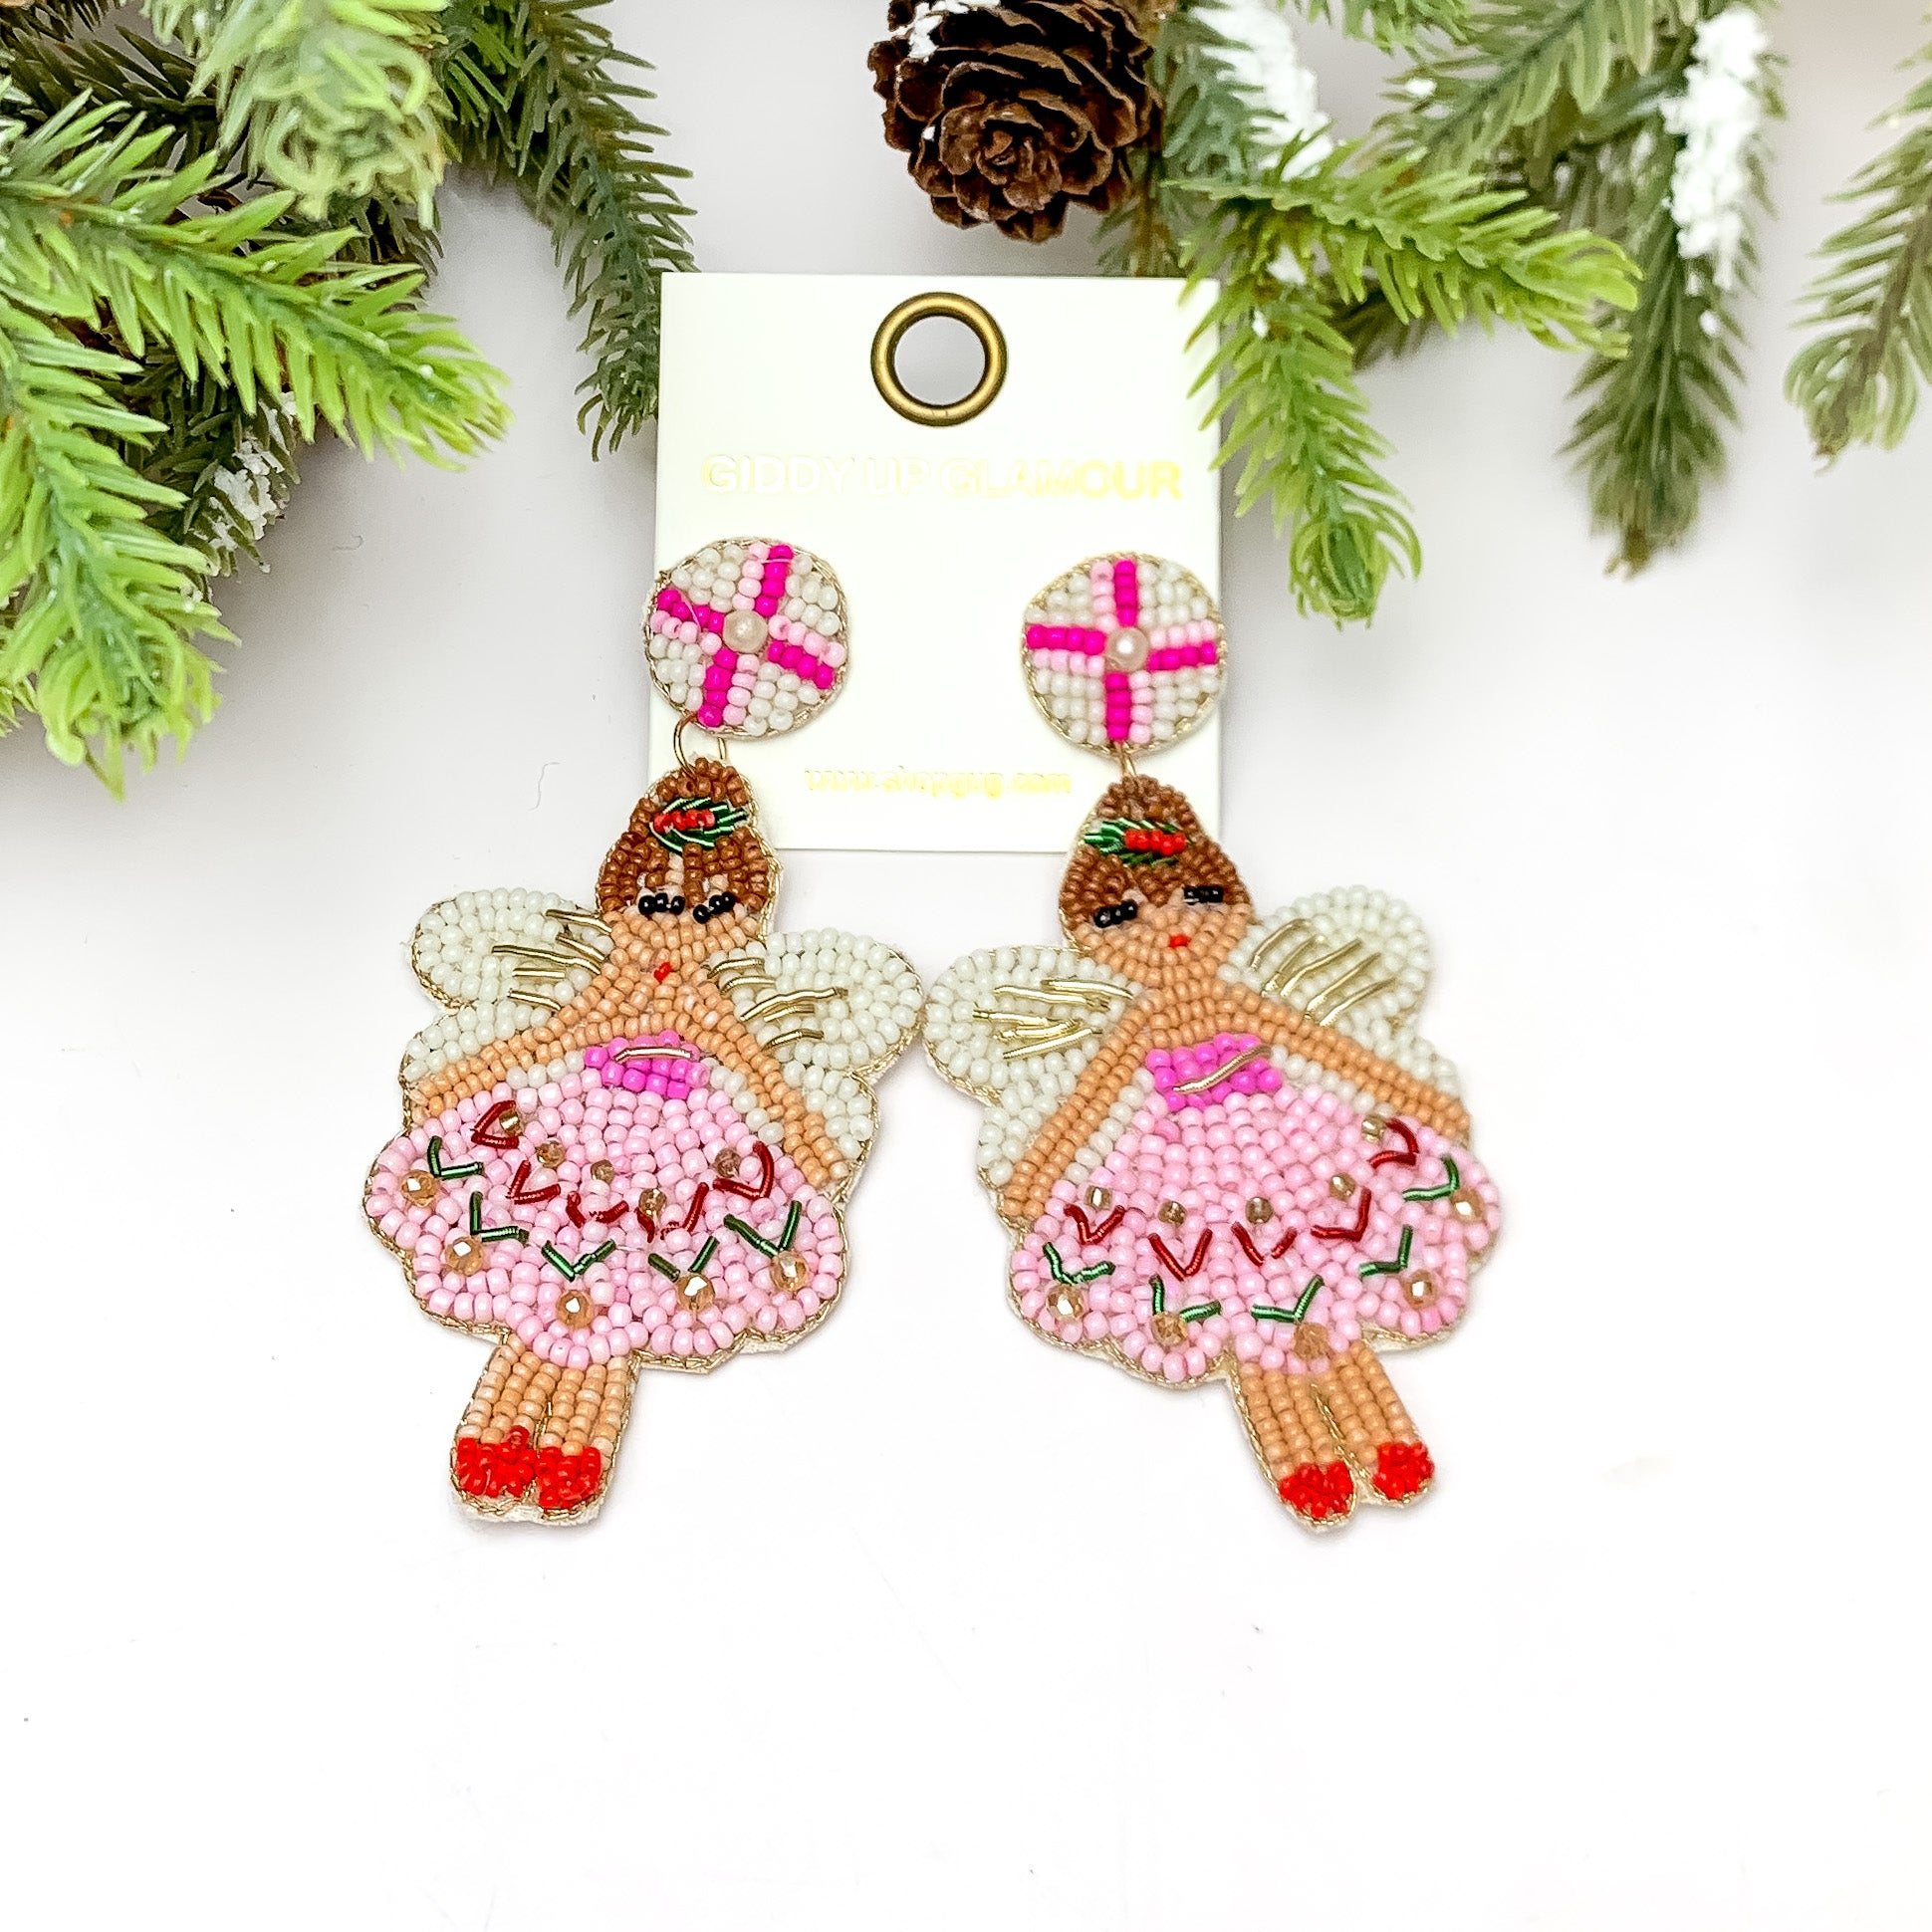 Beaded Christmas Fairy Earrings in Pink Tones. These earrings are pictured on a white background with a tree and pine cones at the top.